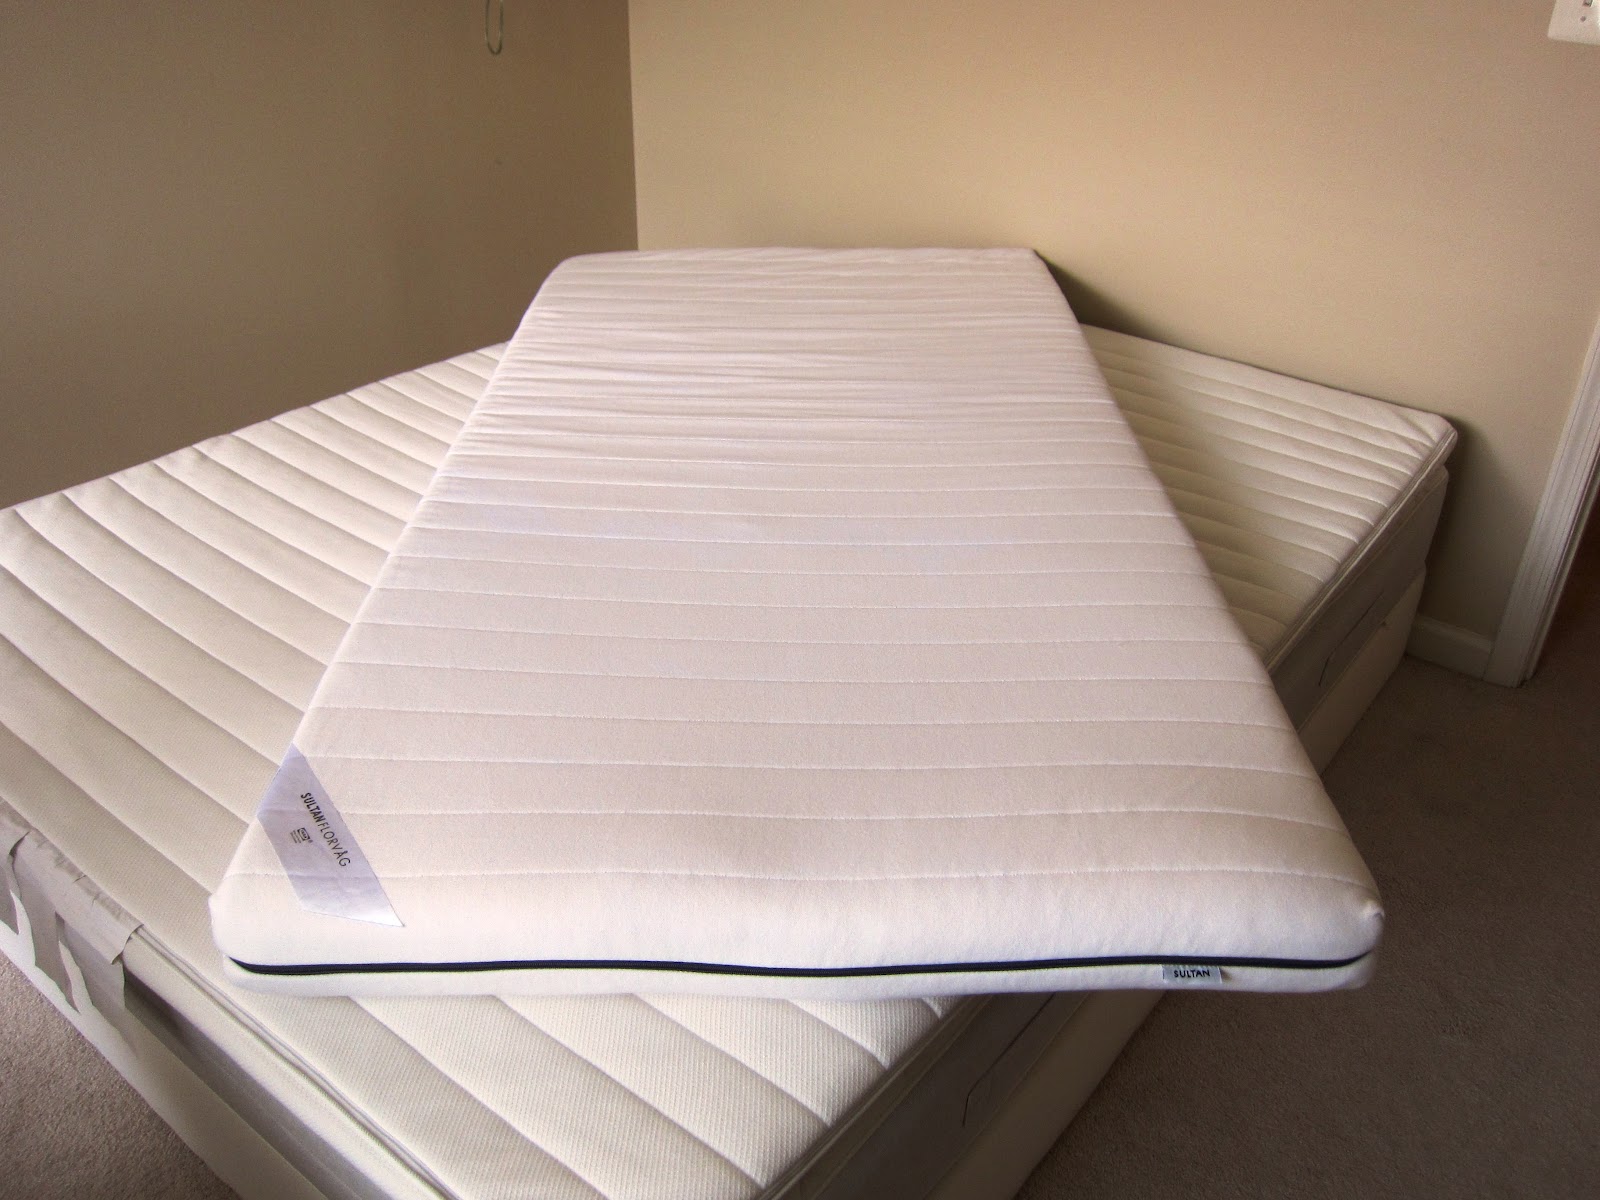 ikea exarby mattress review